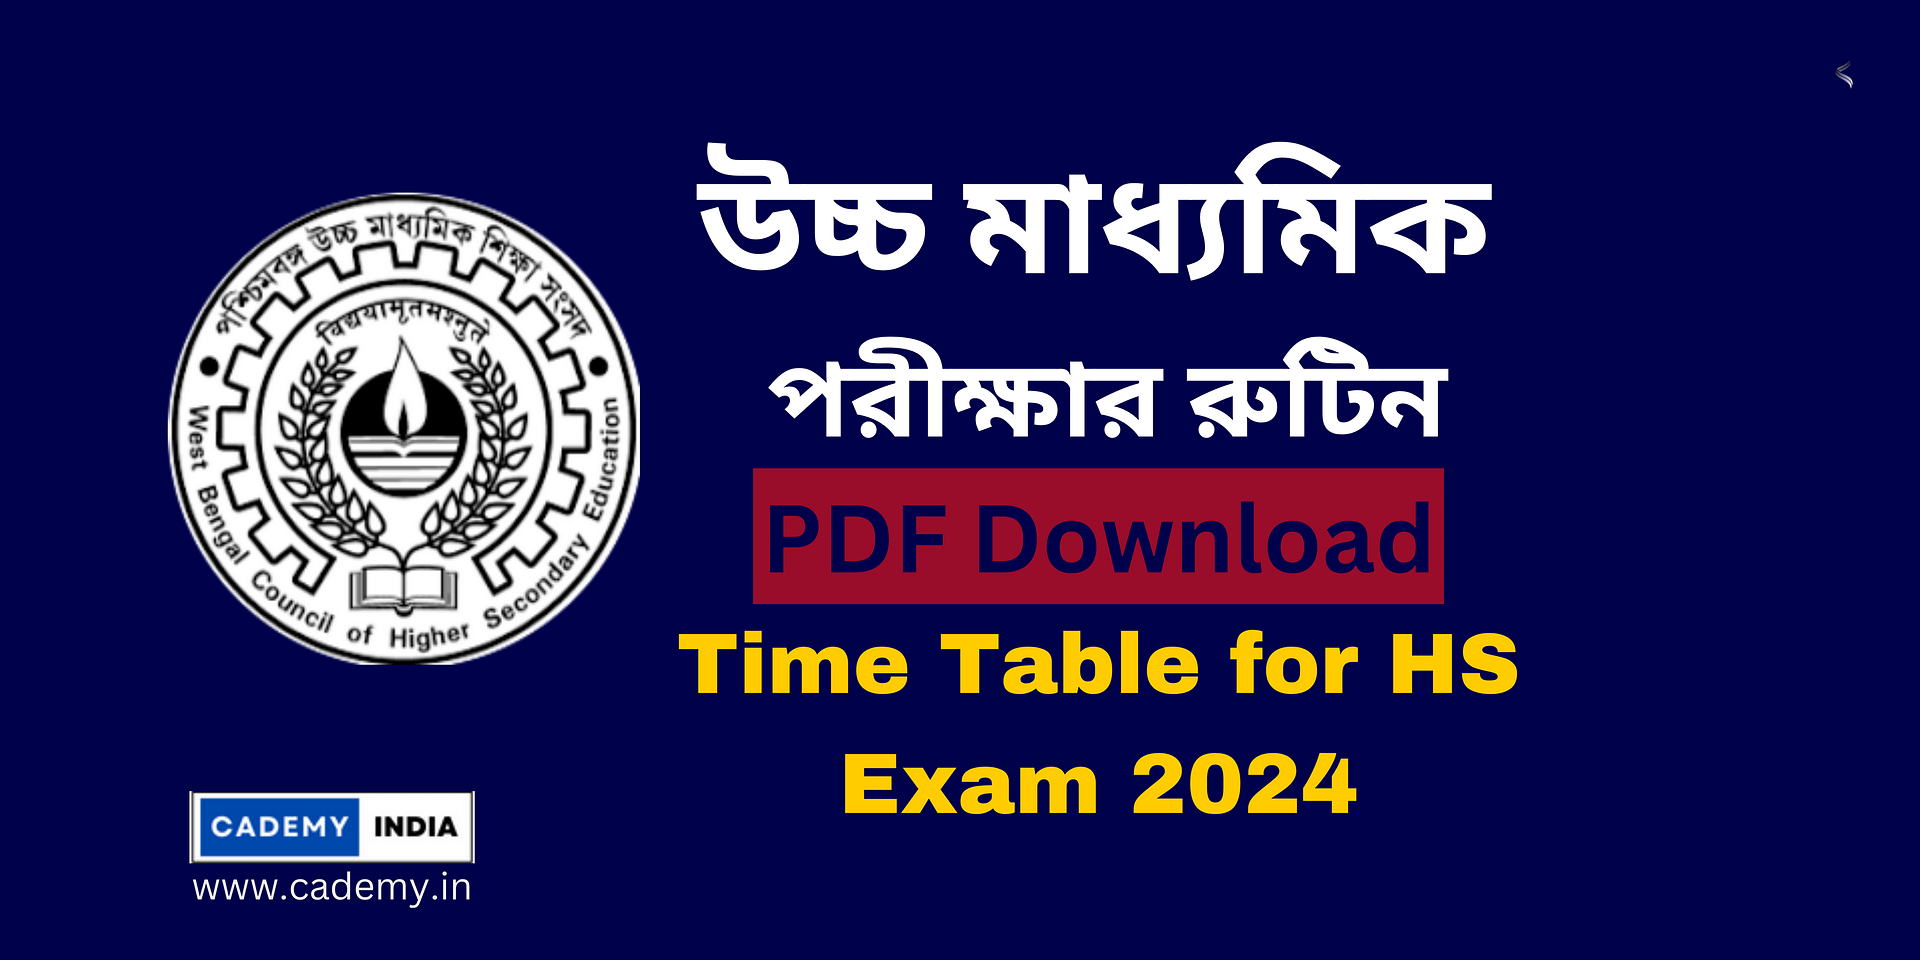 WBCHSE HS Exam Routine 2024 , West Bengal | Time Table for HS Exam 2024 | উচ্চ মাধ্যমিক পরীক্ষার রুটিন – ২০২৪